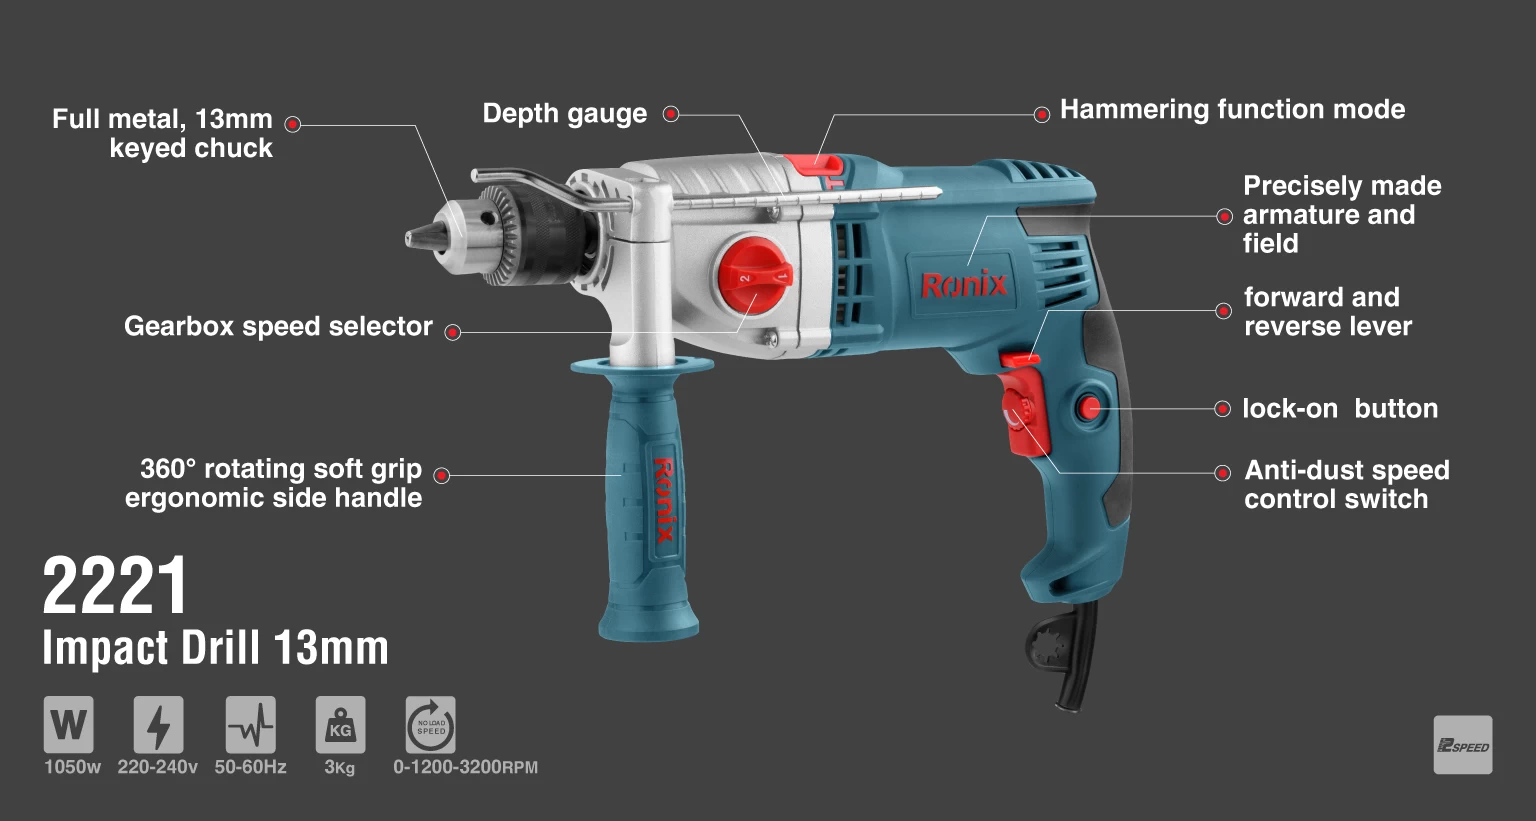 Corded Impact Drill, 1050W, Keyed Chuck_details